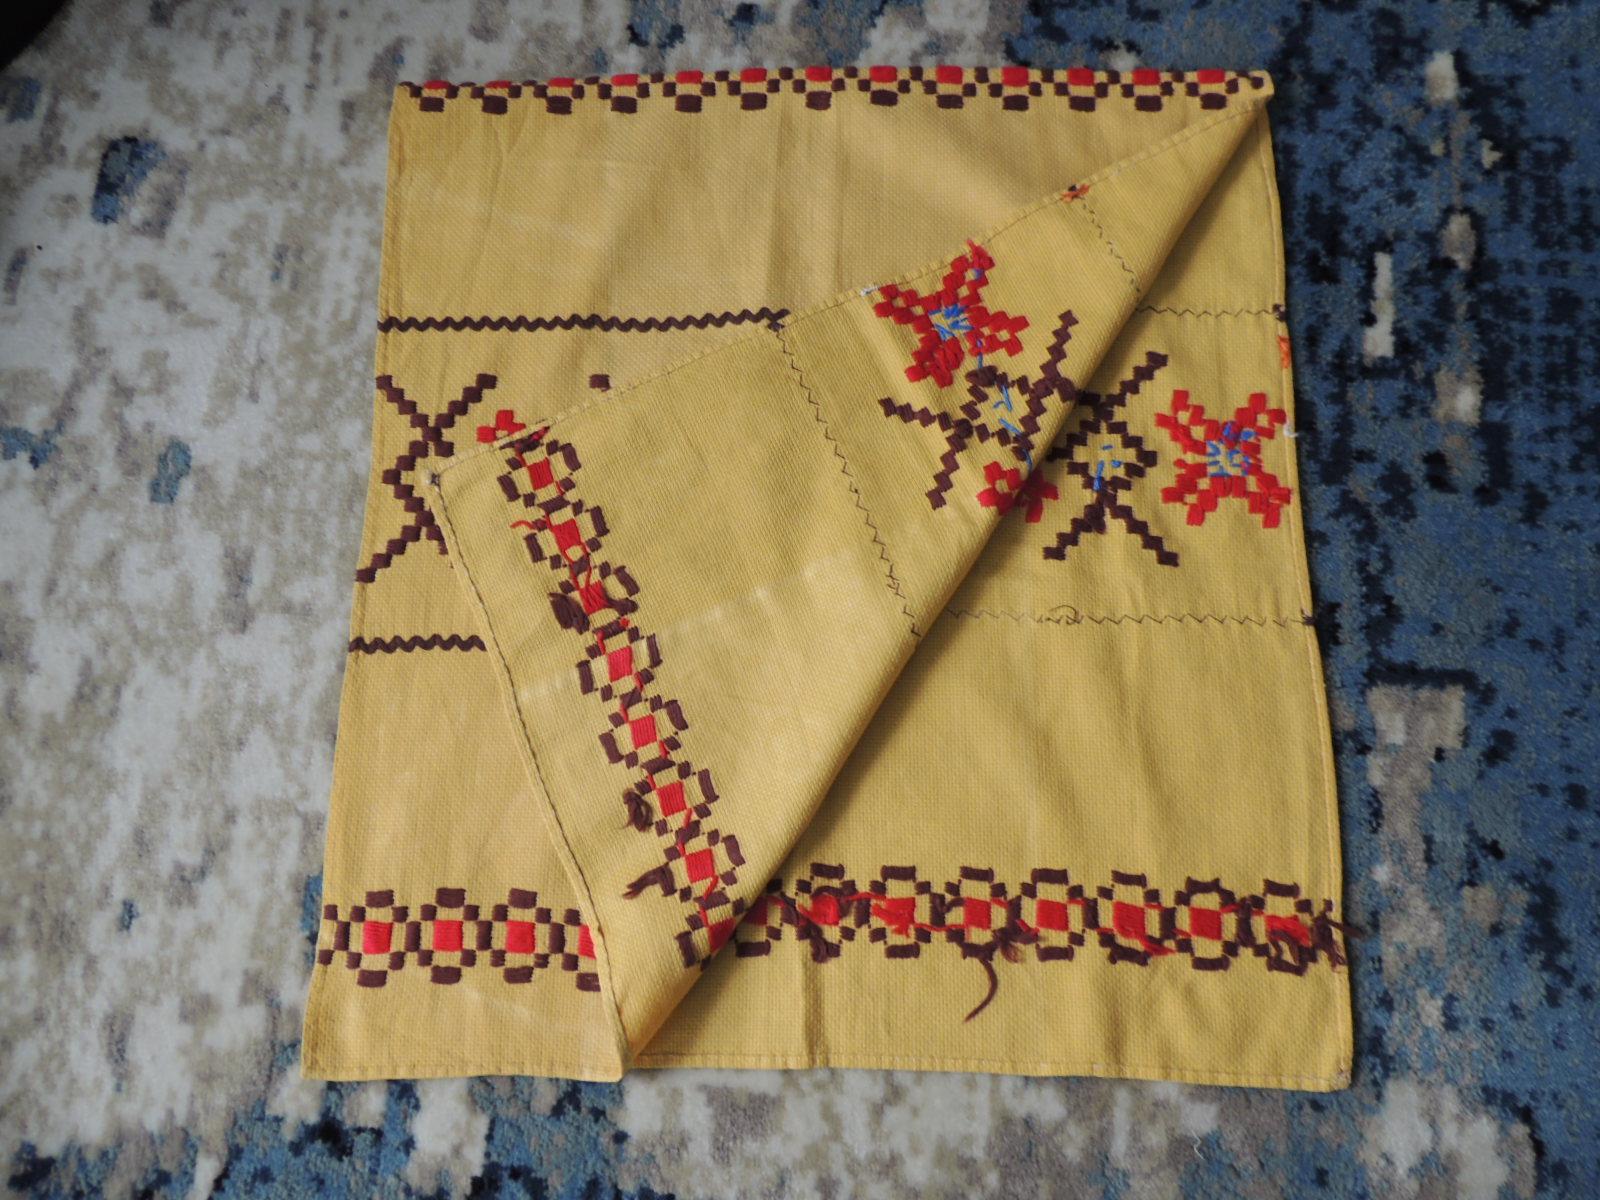 Vintage red and brown on yellow embroidered textile.
Could be use as a table runner or topper and as well to make
decorative pillows. Finished hem all around.
Wool on cotton.
Size: 20.5